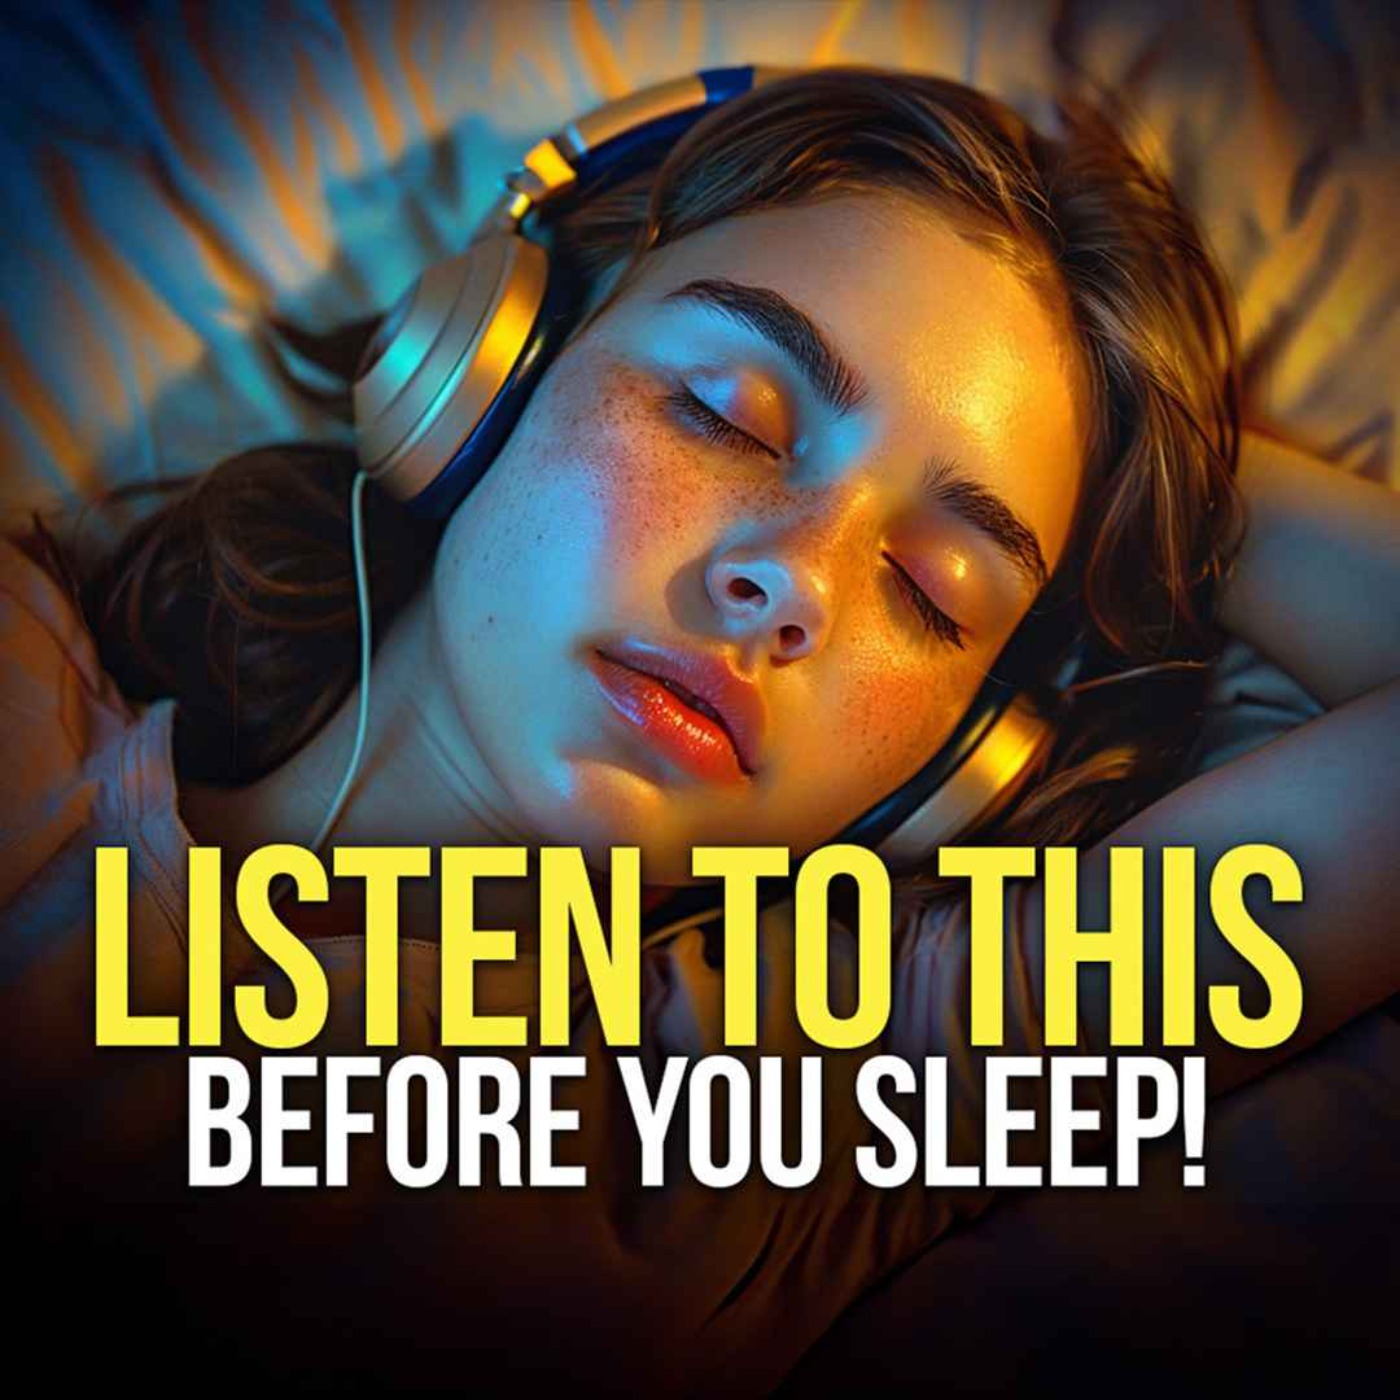 Best Guided Meditation for Success, Wealth, Healing, and Happiness - LISTEN EVERY NIGHT!